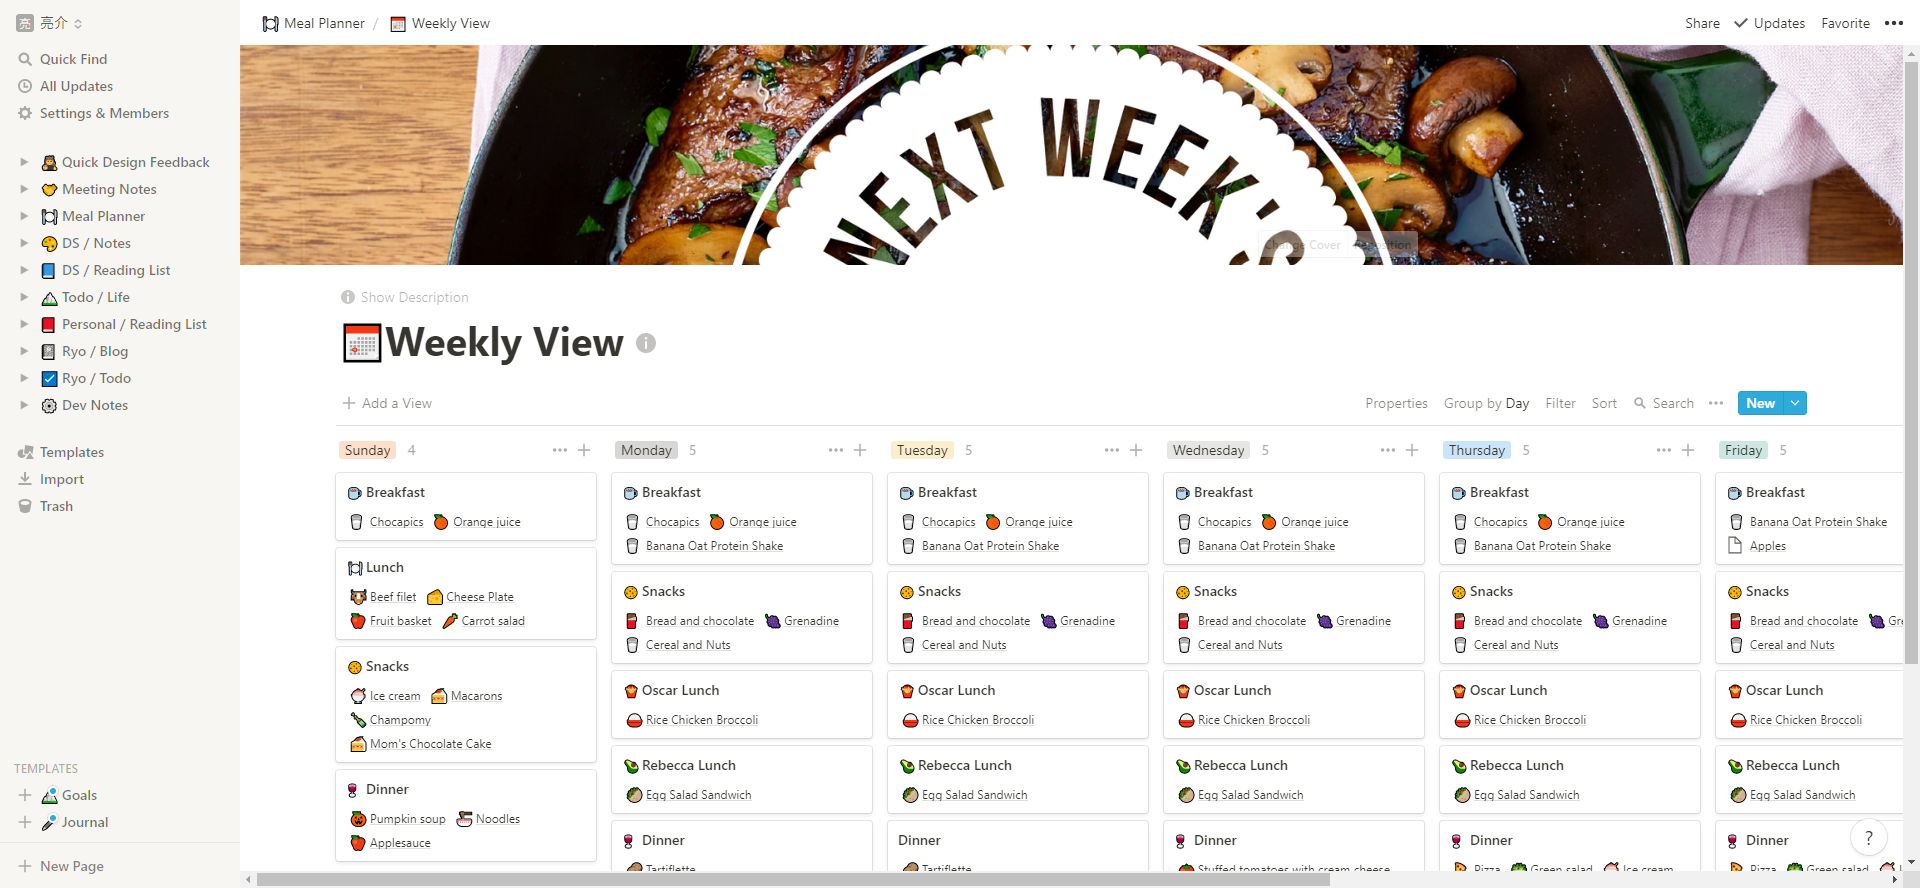 Meal planner using Notion's linked database and kanban functionality